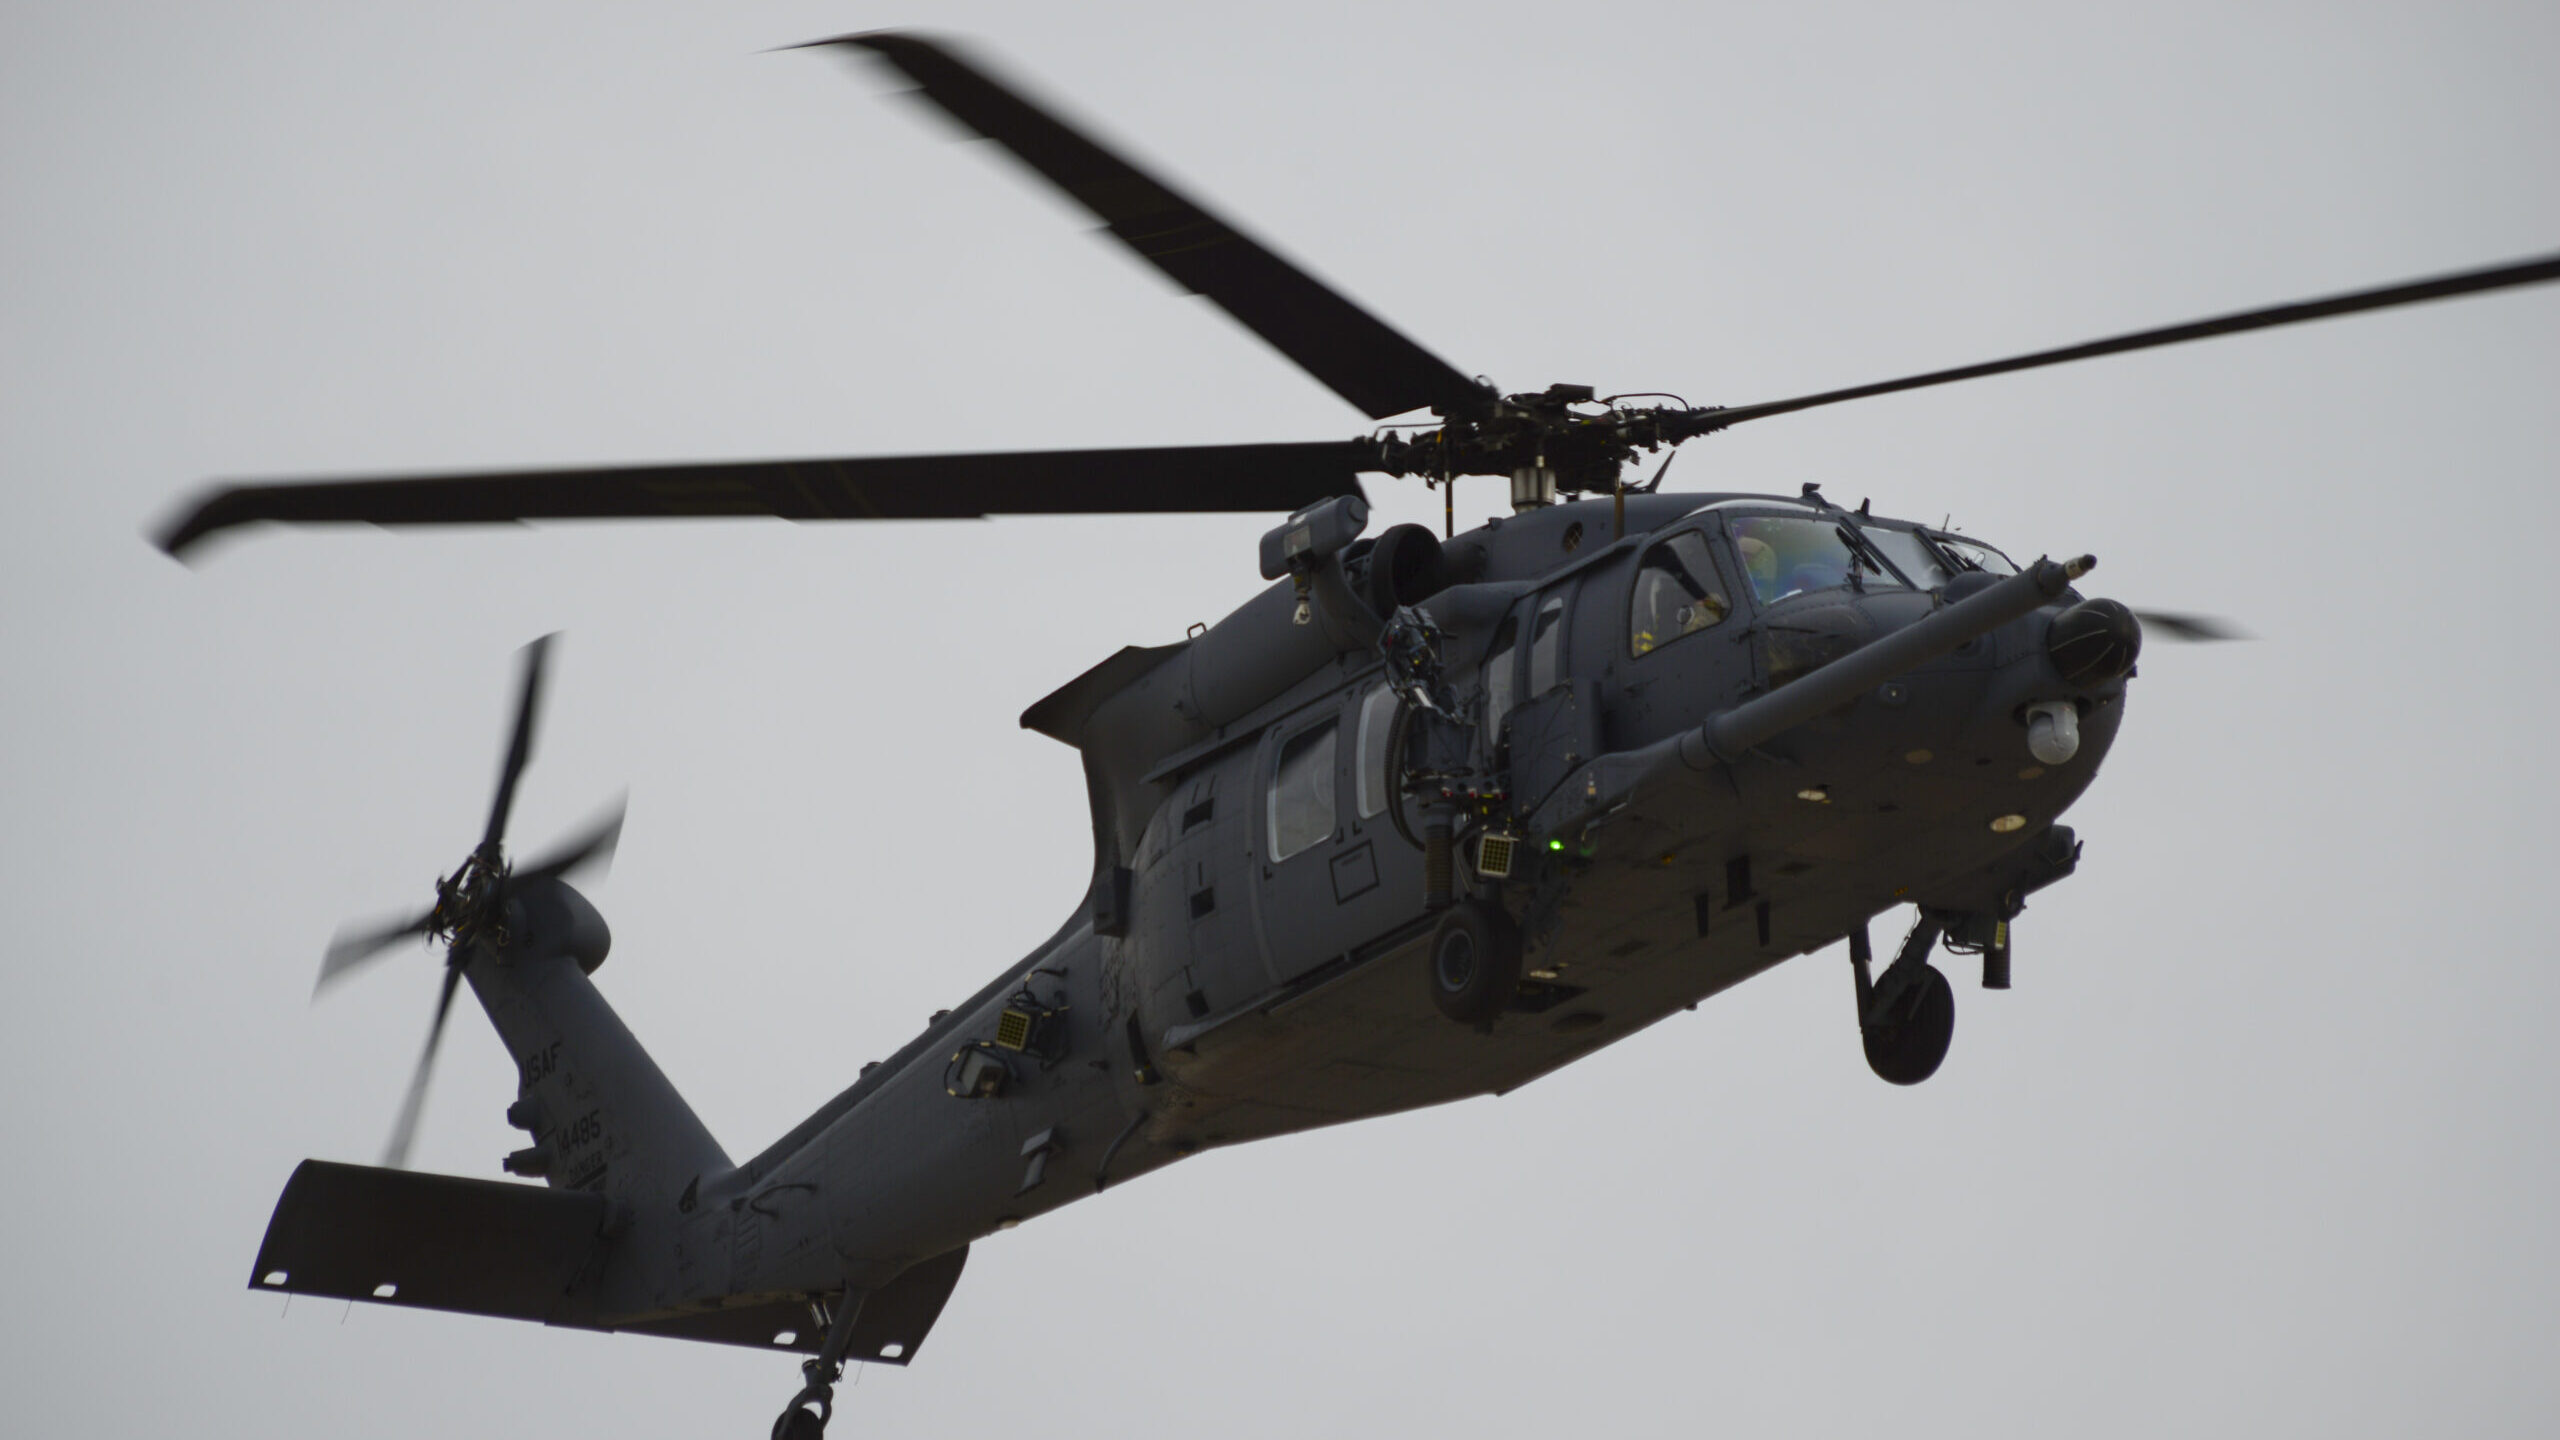 Despite cuts, HH-60W and F-15EX not at risk of ‘critical’ budgetary breach, cancellation